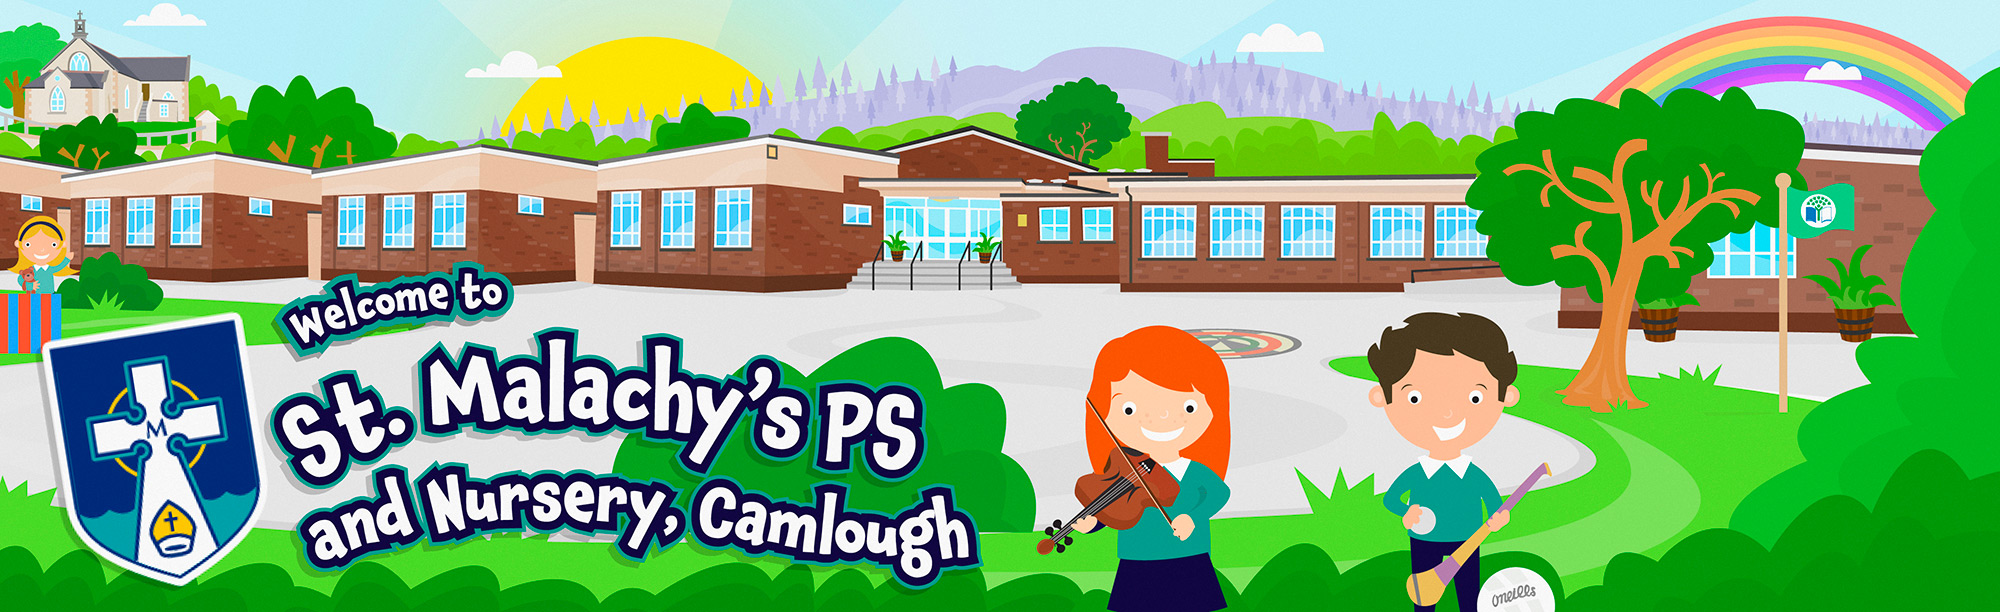 St. Malachy's PS and Nursery, Camlough, Newry